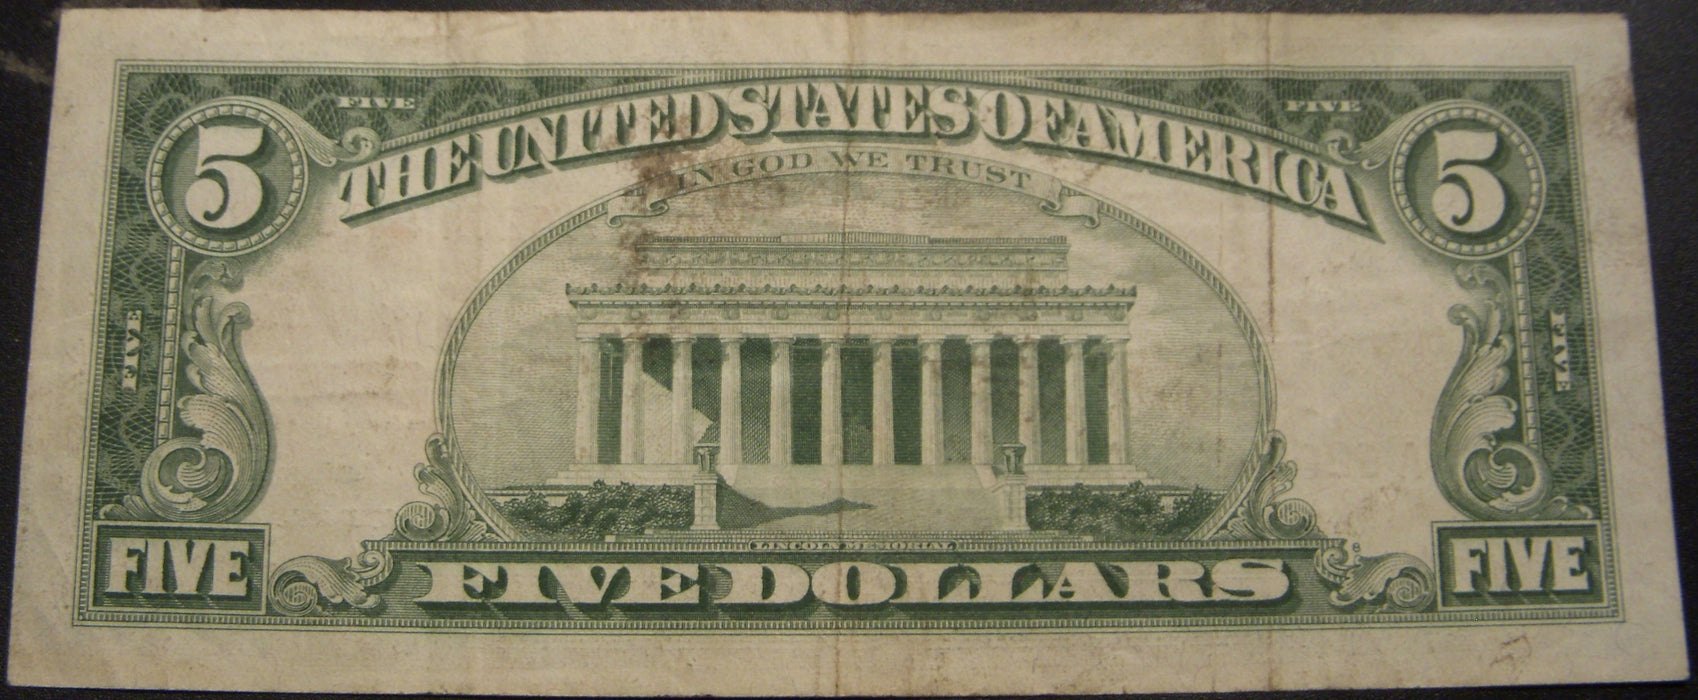 1963 $5 United States Note - FR# 1536